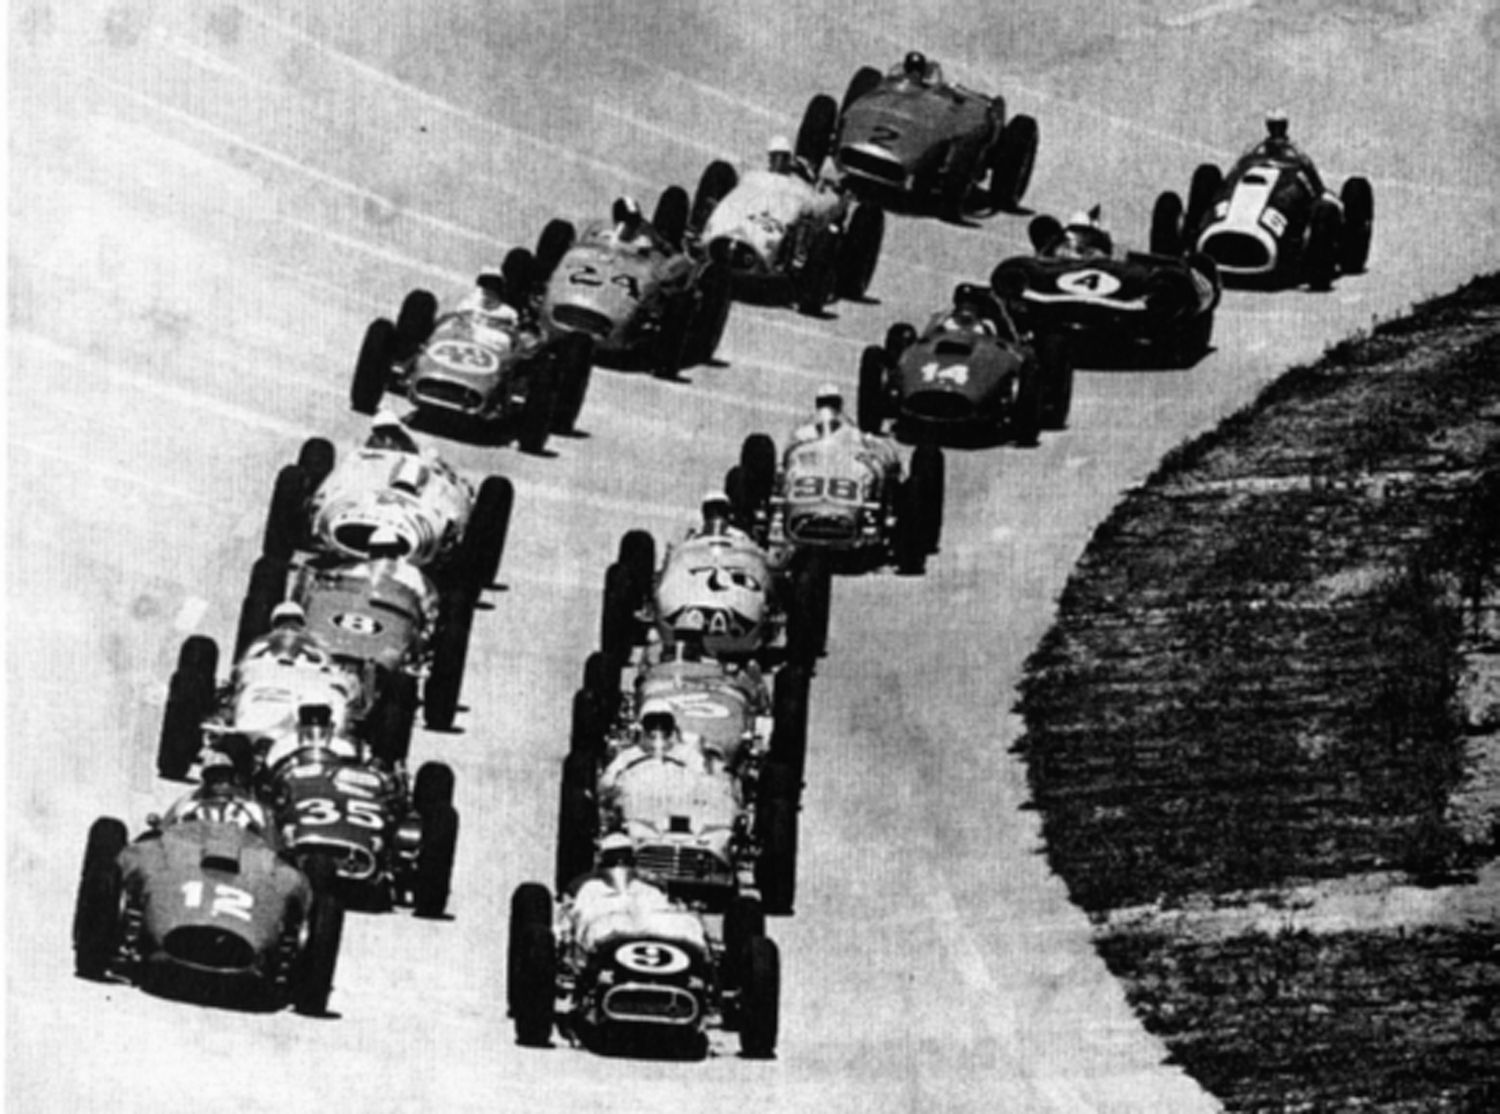 1957 Race of Two Worlds at Monza.